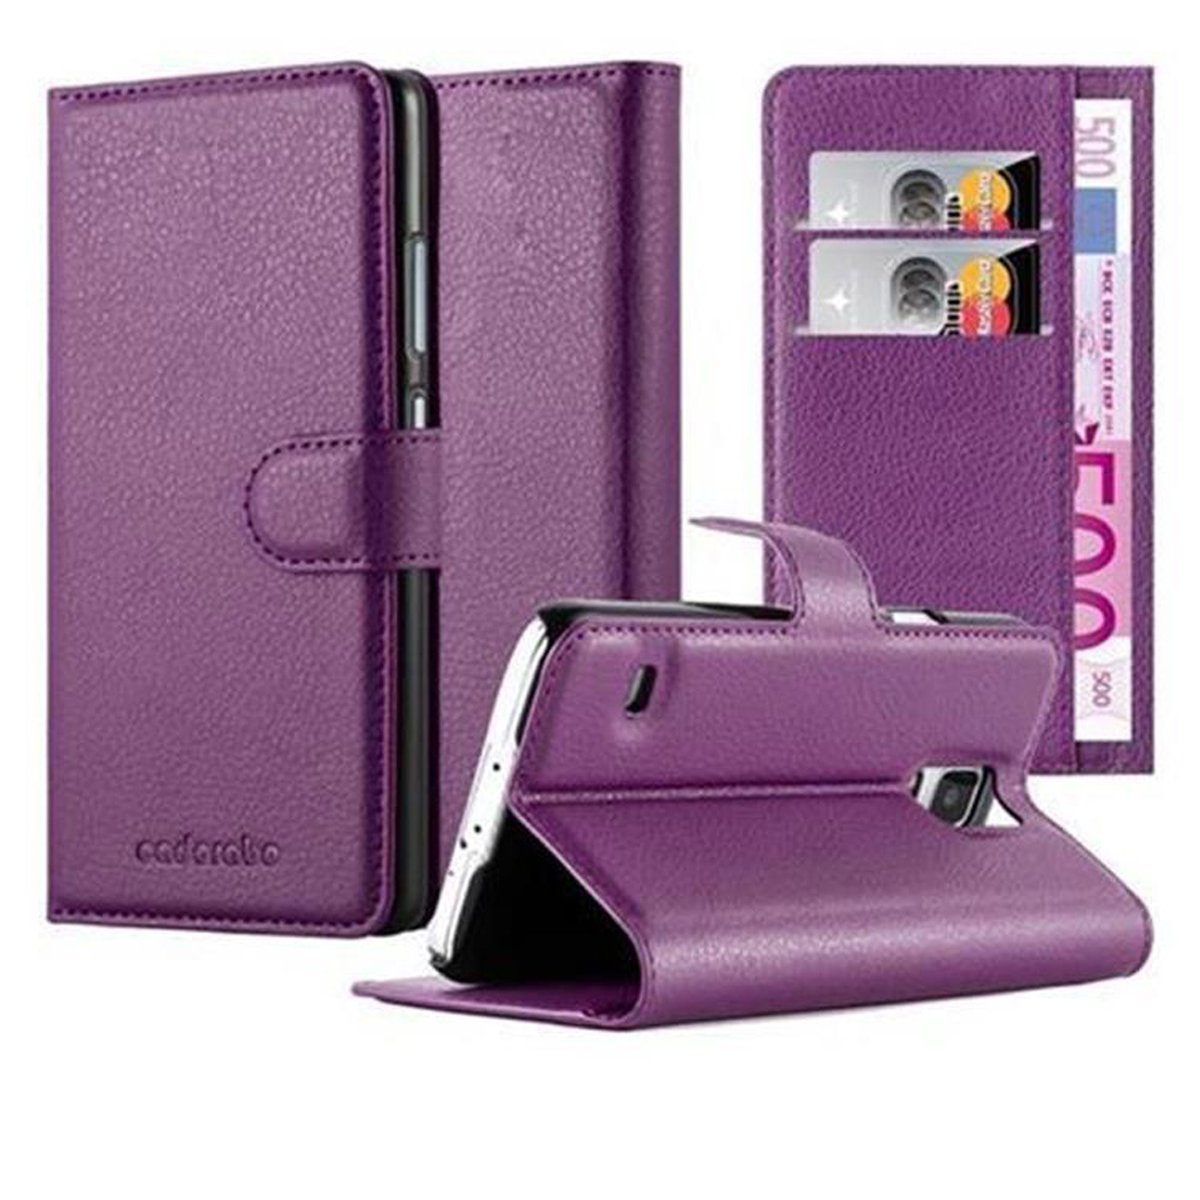 Hülle VIOLETT MANGAN NEO, Bookcover, CADORABO S5 Standfunktion, Book Samsung, / S5 Galaxy